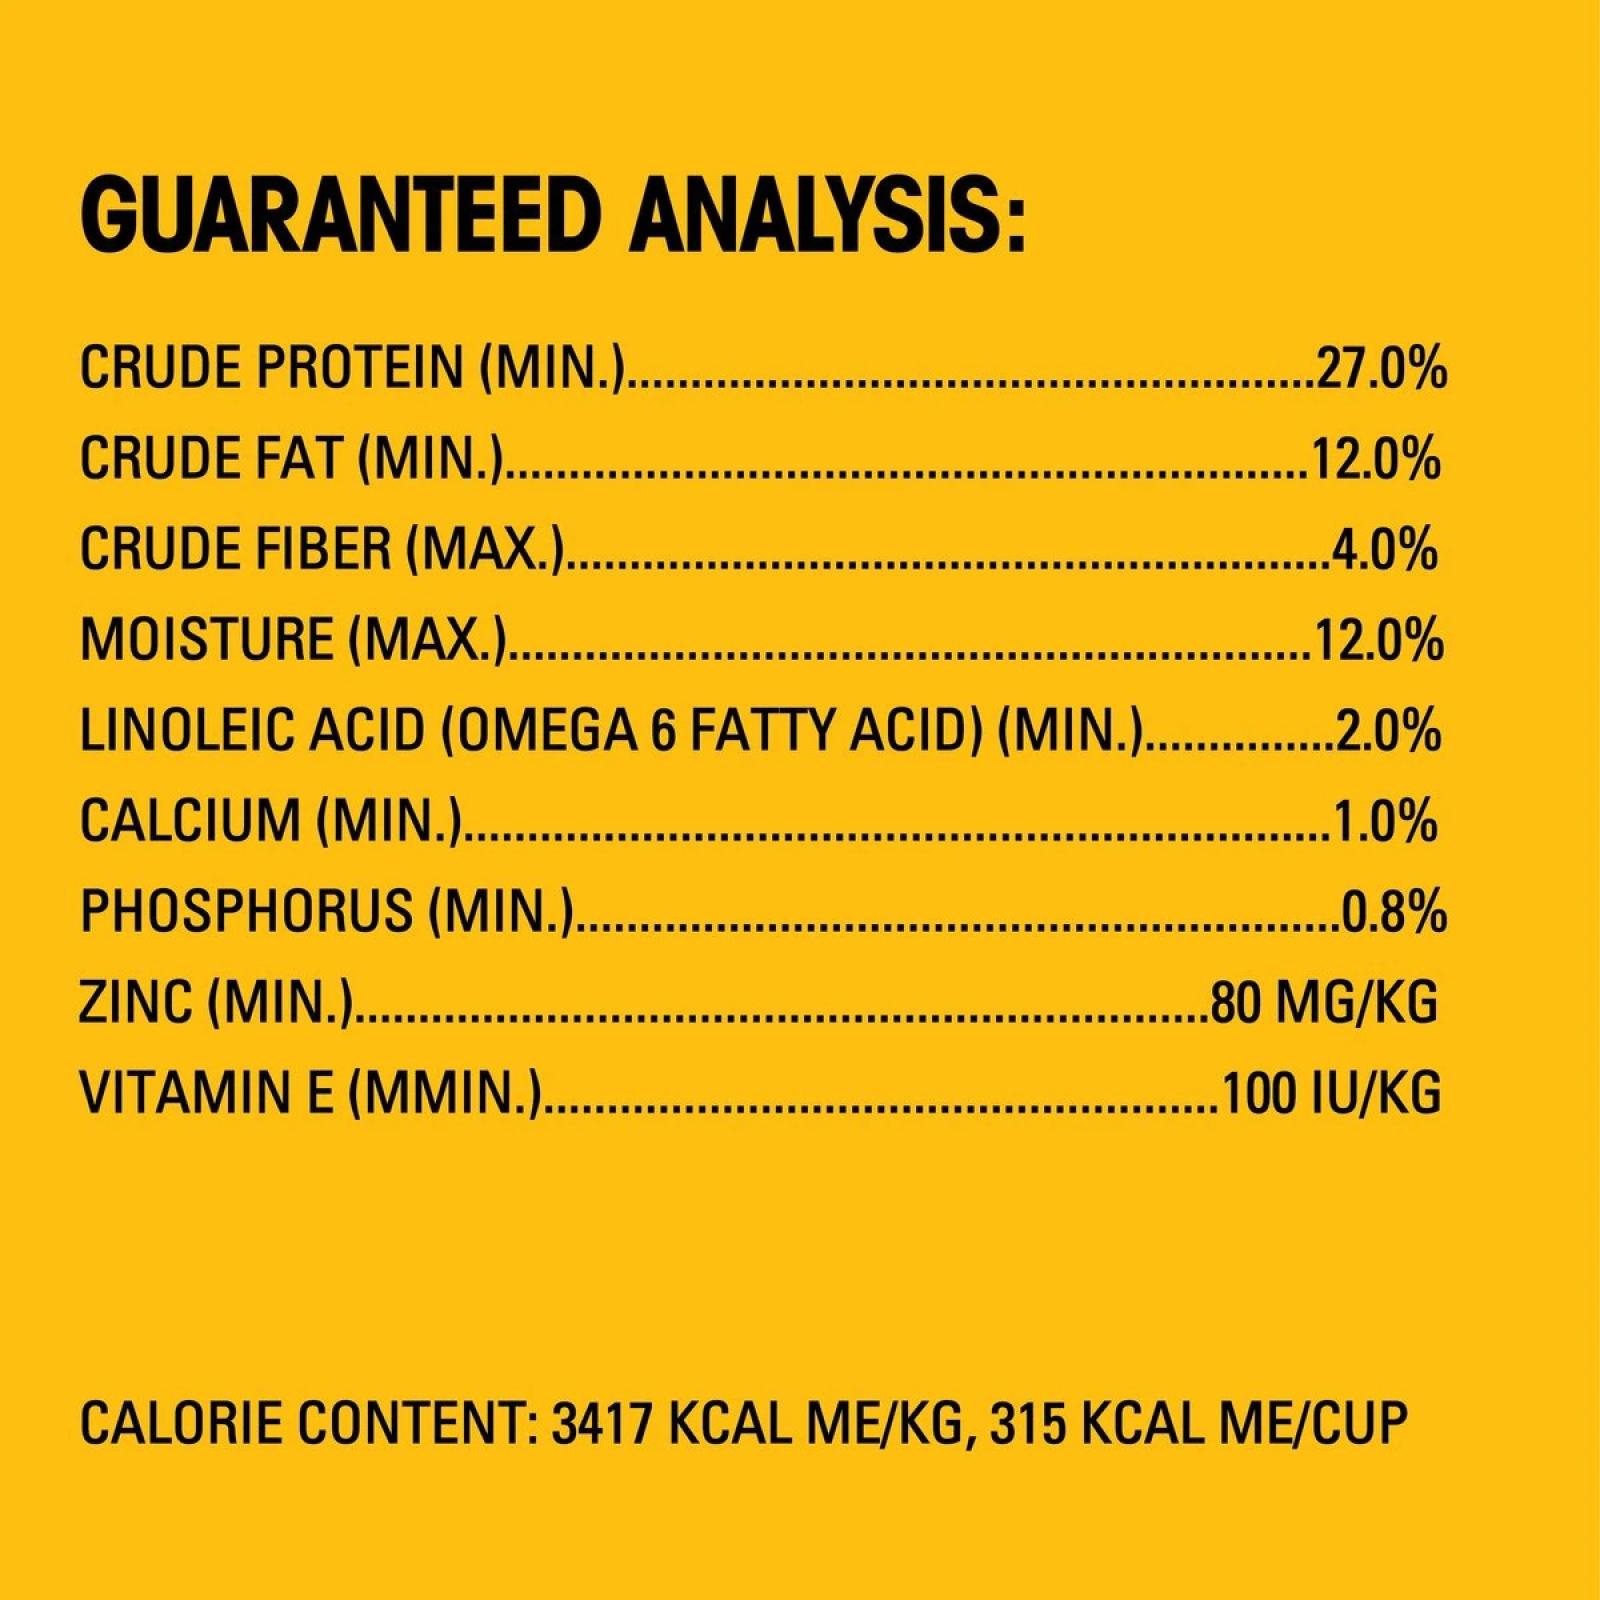 Pedigree High Protein with Red Meat